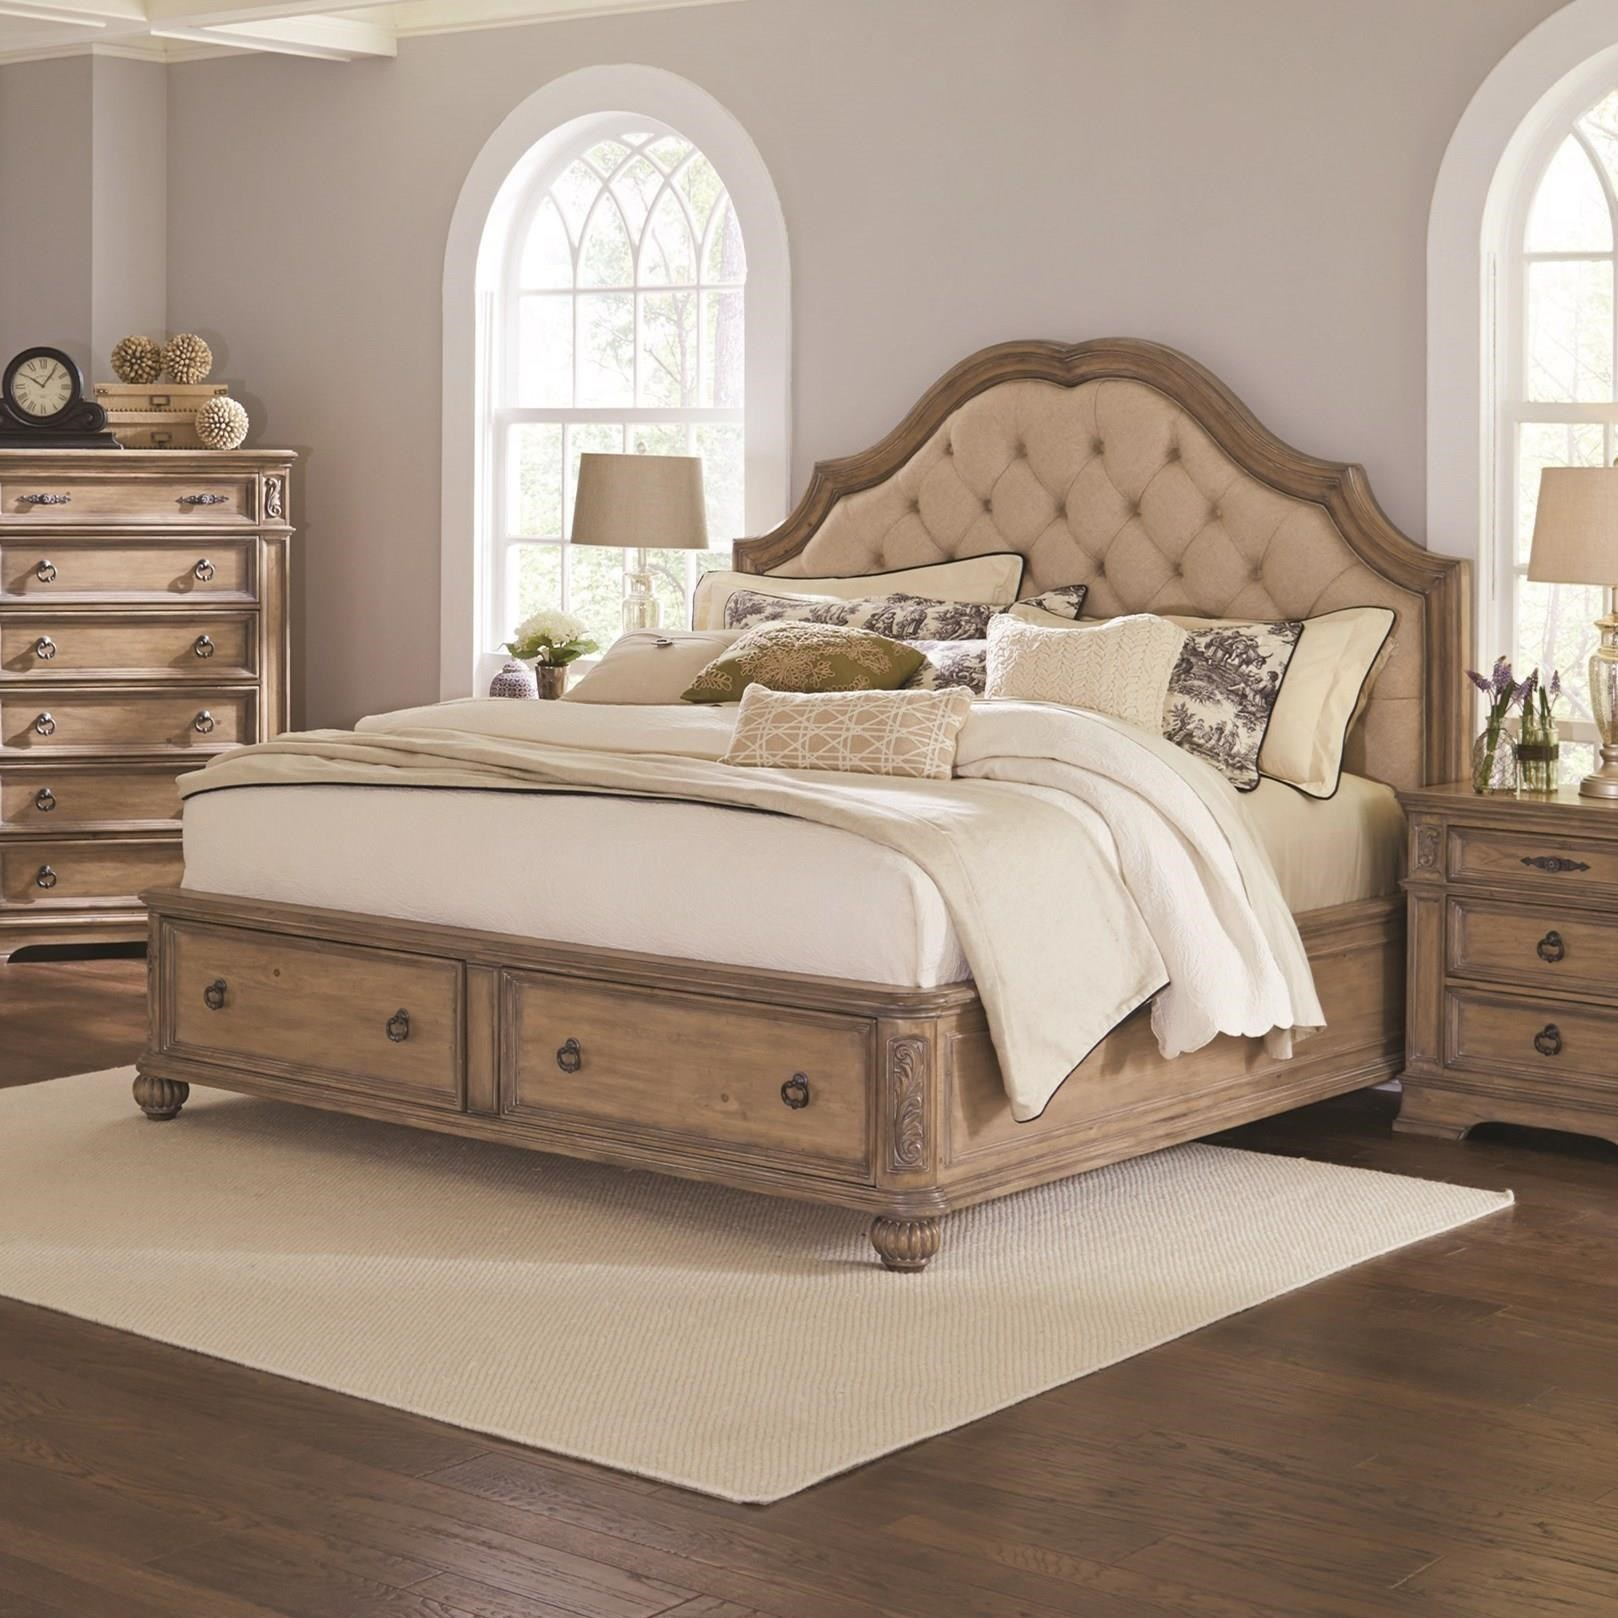 Ilana Queen Storage Bed With Upholstered Headboard Fine Furniture At Del Sol Furniture regarding dimensions 1618 X 1618